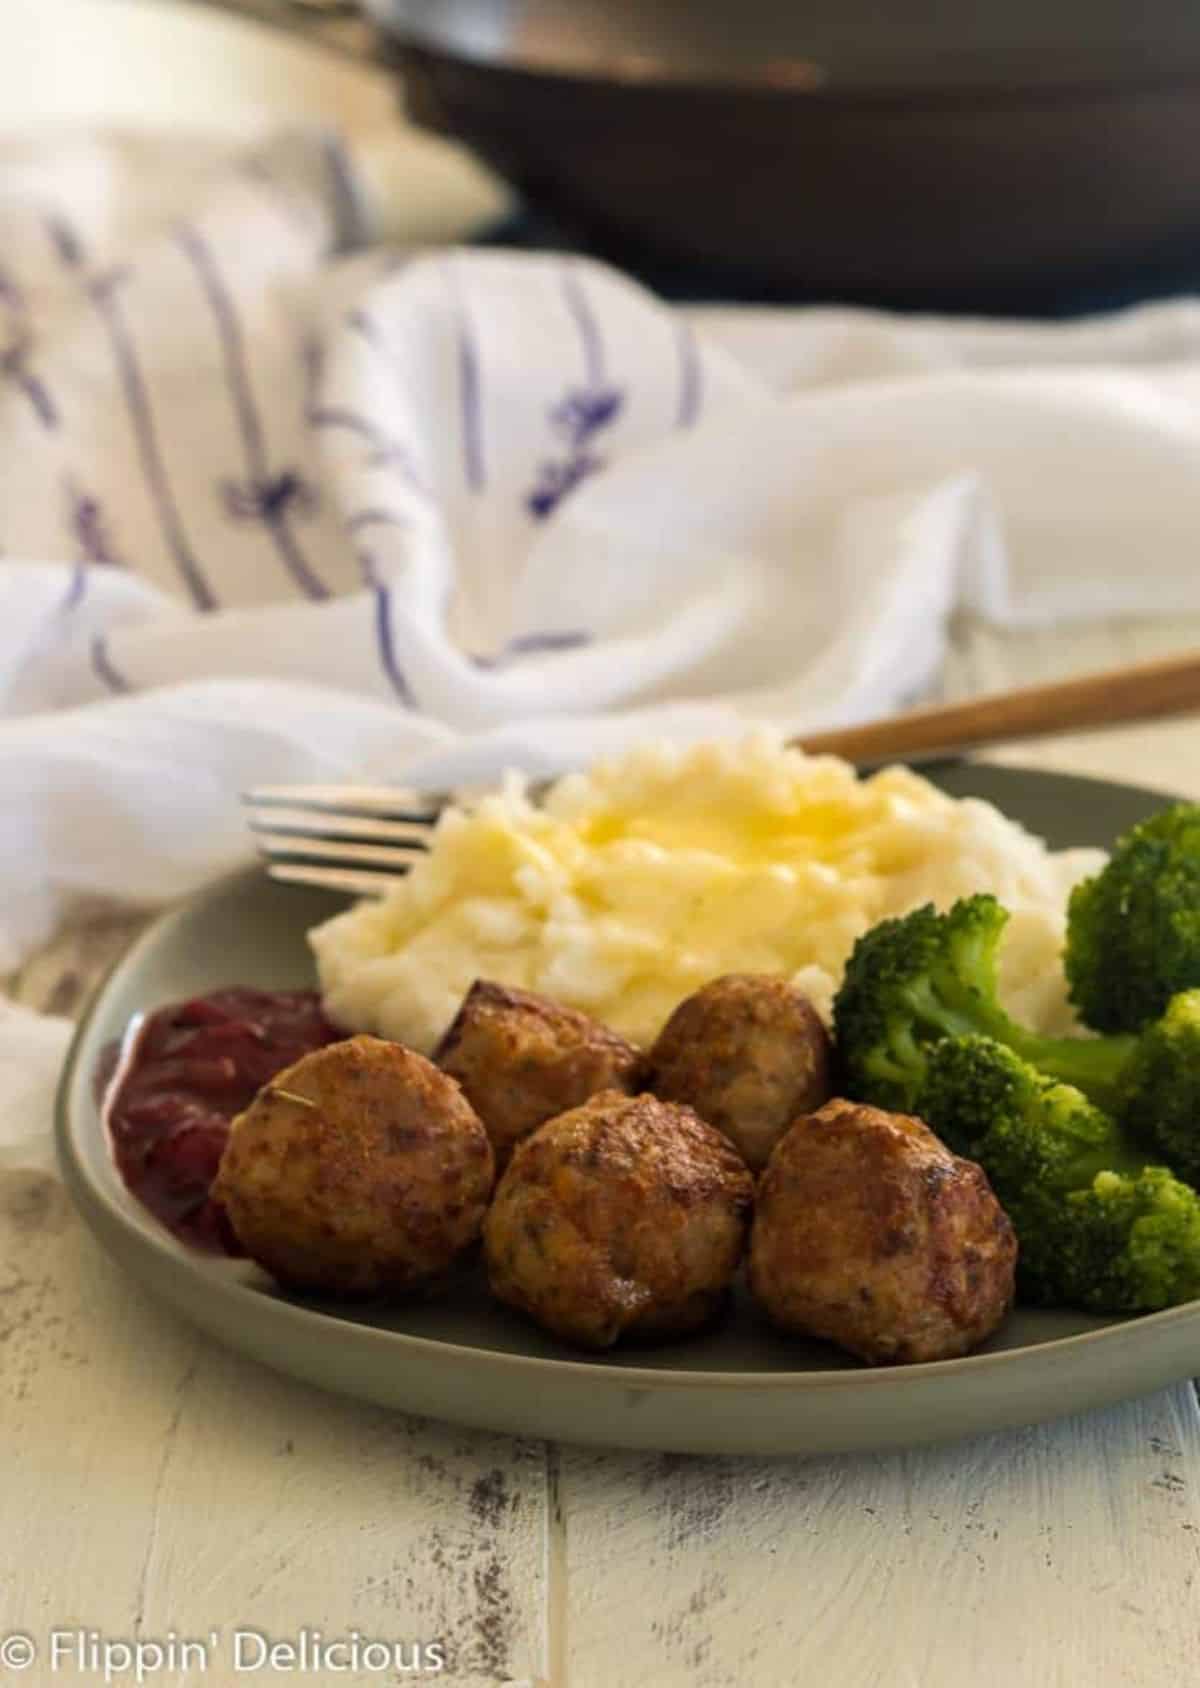 Delicious Gluten-Free Meatballs with mashed potatoes and broccoli on a gray plate.